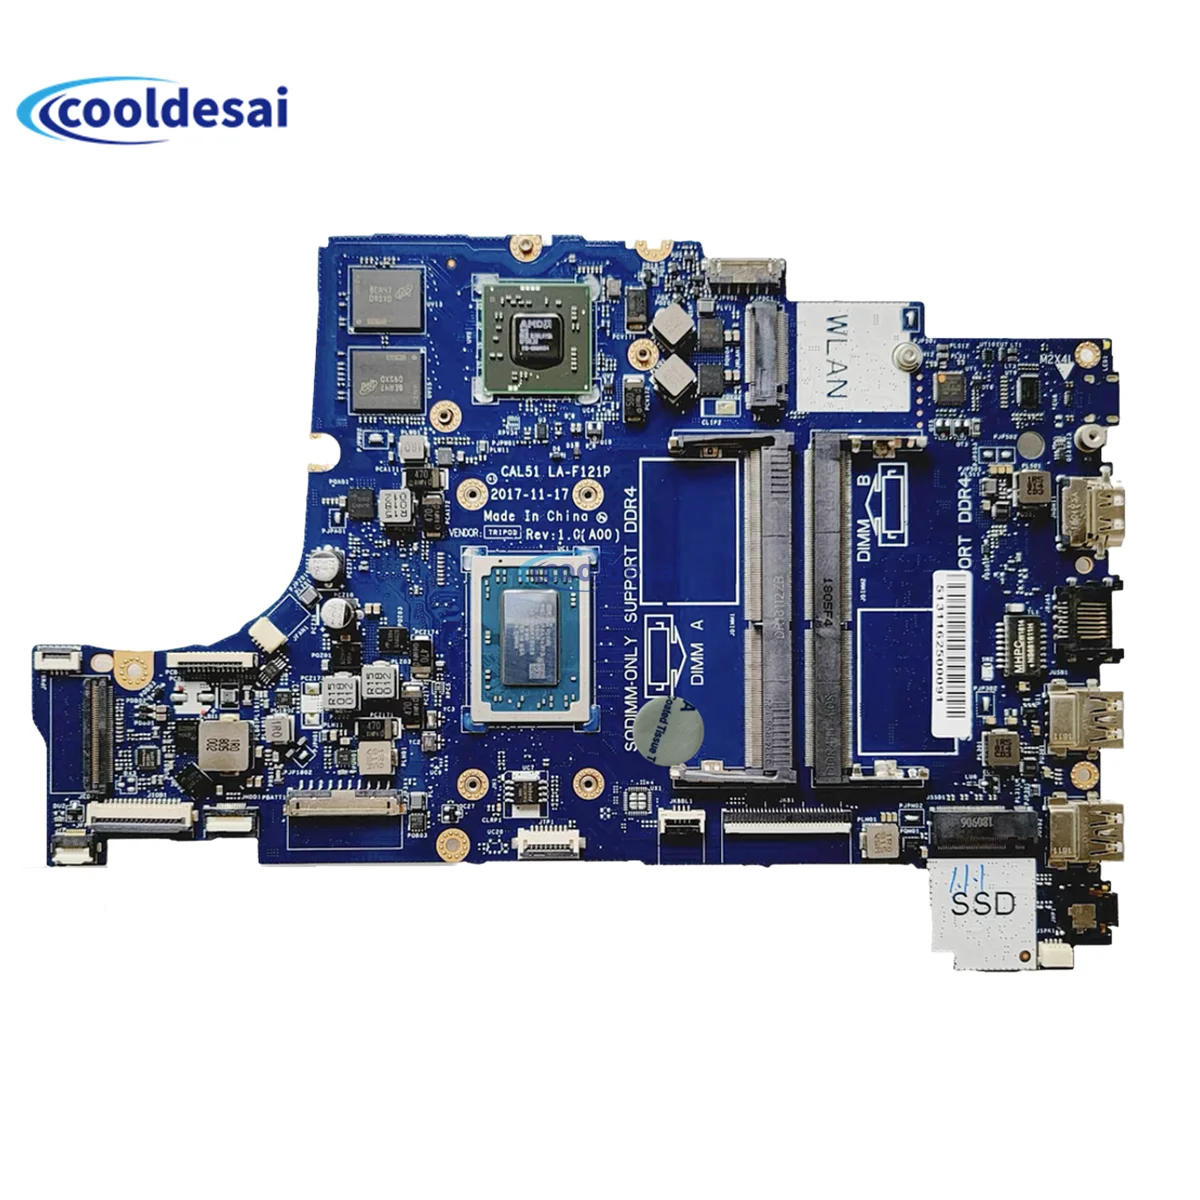 

CAL51 LA-F121P FOR DELL INSPIRON 3583 5575 5775 Laptop Motherboard with Ryzen R3 R5 R7 CPU R7 M460 2GB GPU DDR4 100% Tested